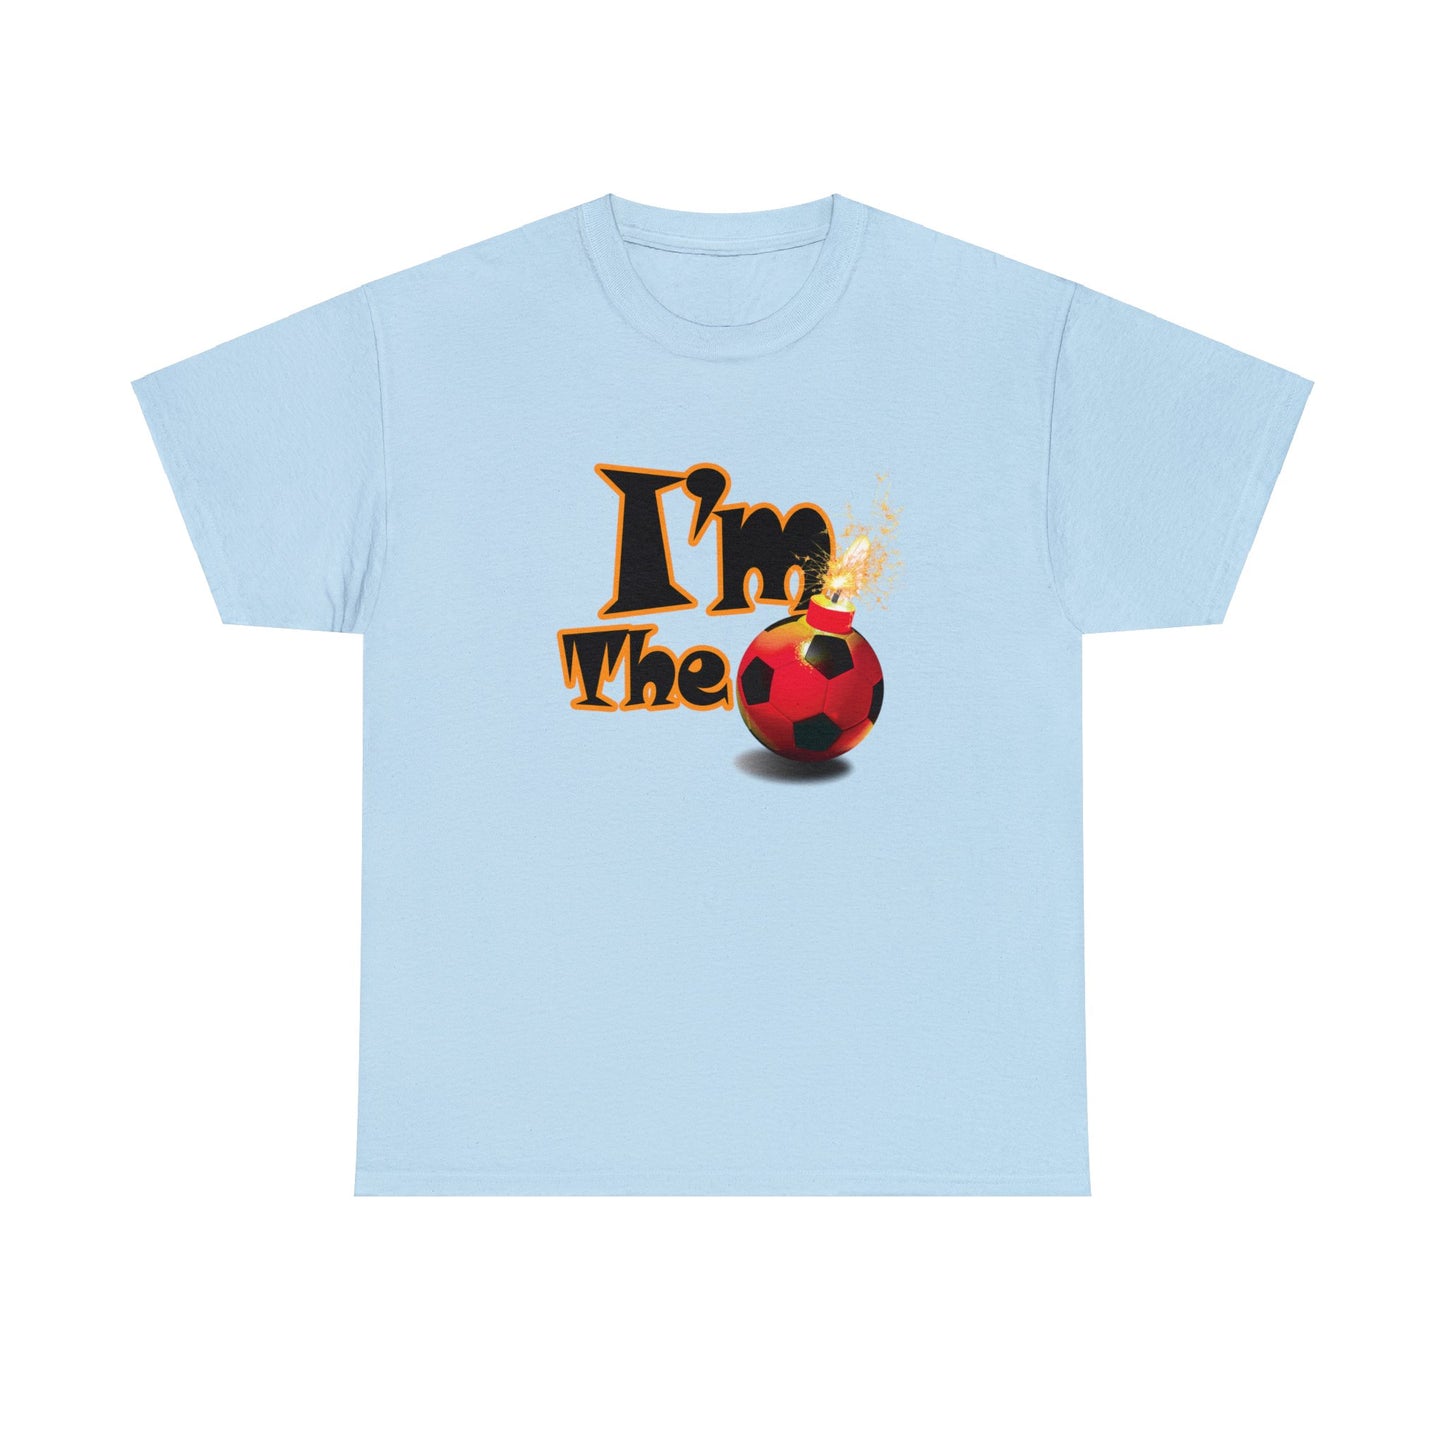 I'm the Bomb, Soccer Bomb T-Shirt, funny attitude soccer shirt for soccer players who know they are the bomb, Great gift for your Star